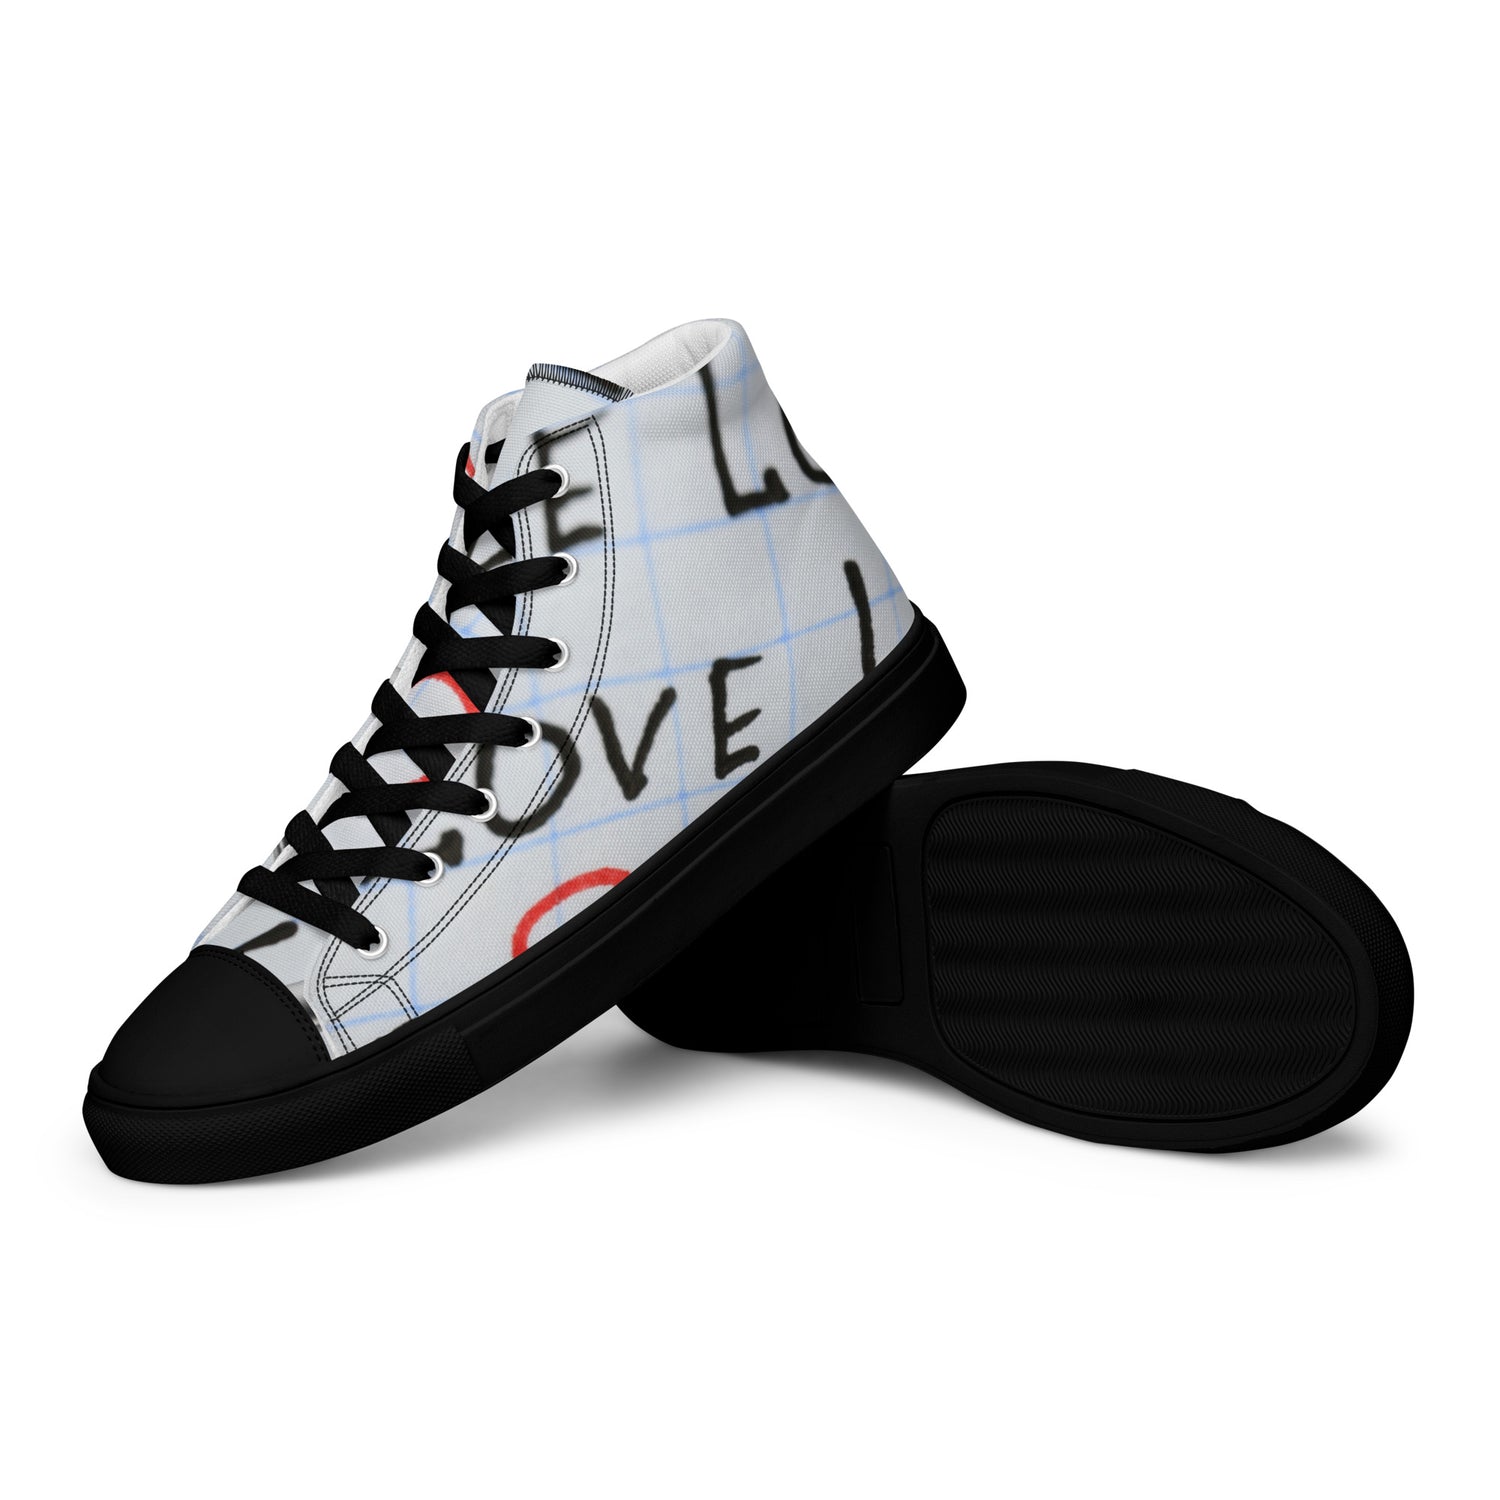 Make sure your feet are feeling loved with these high top canvas sneakers! They're a must-have for any wardrobe, adding a touch of love to your style. Love is the key ingredient!